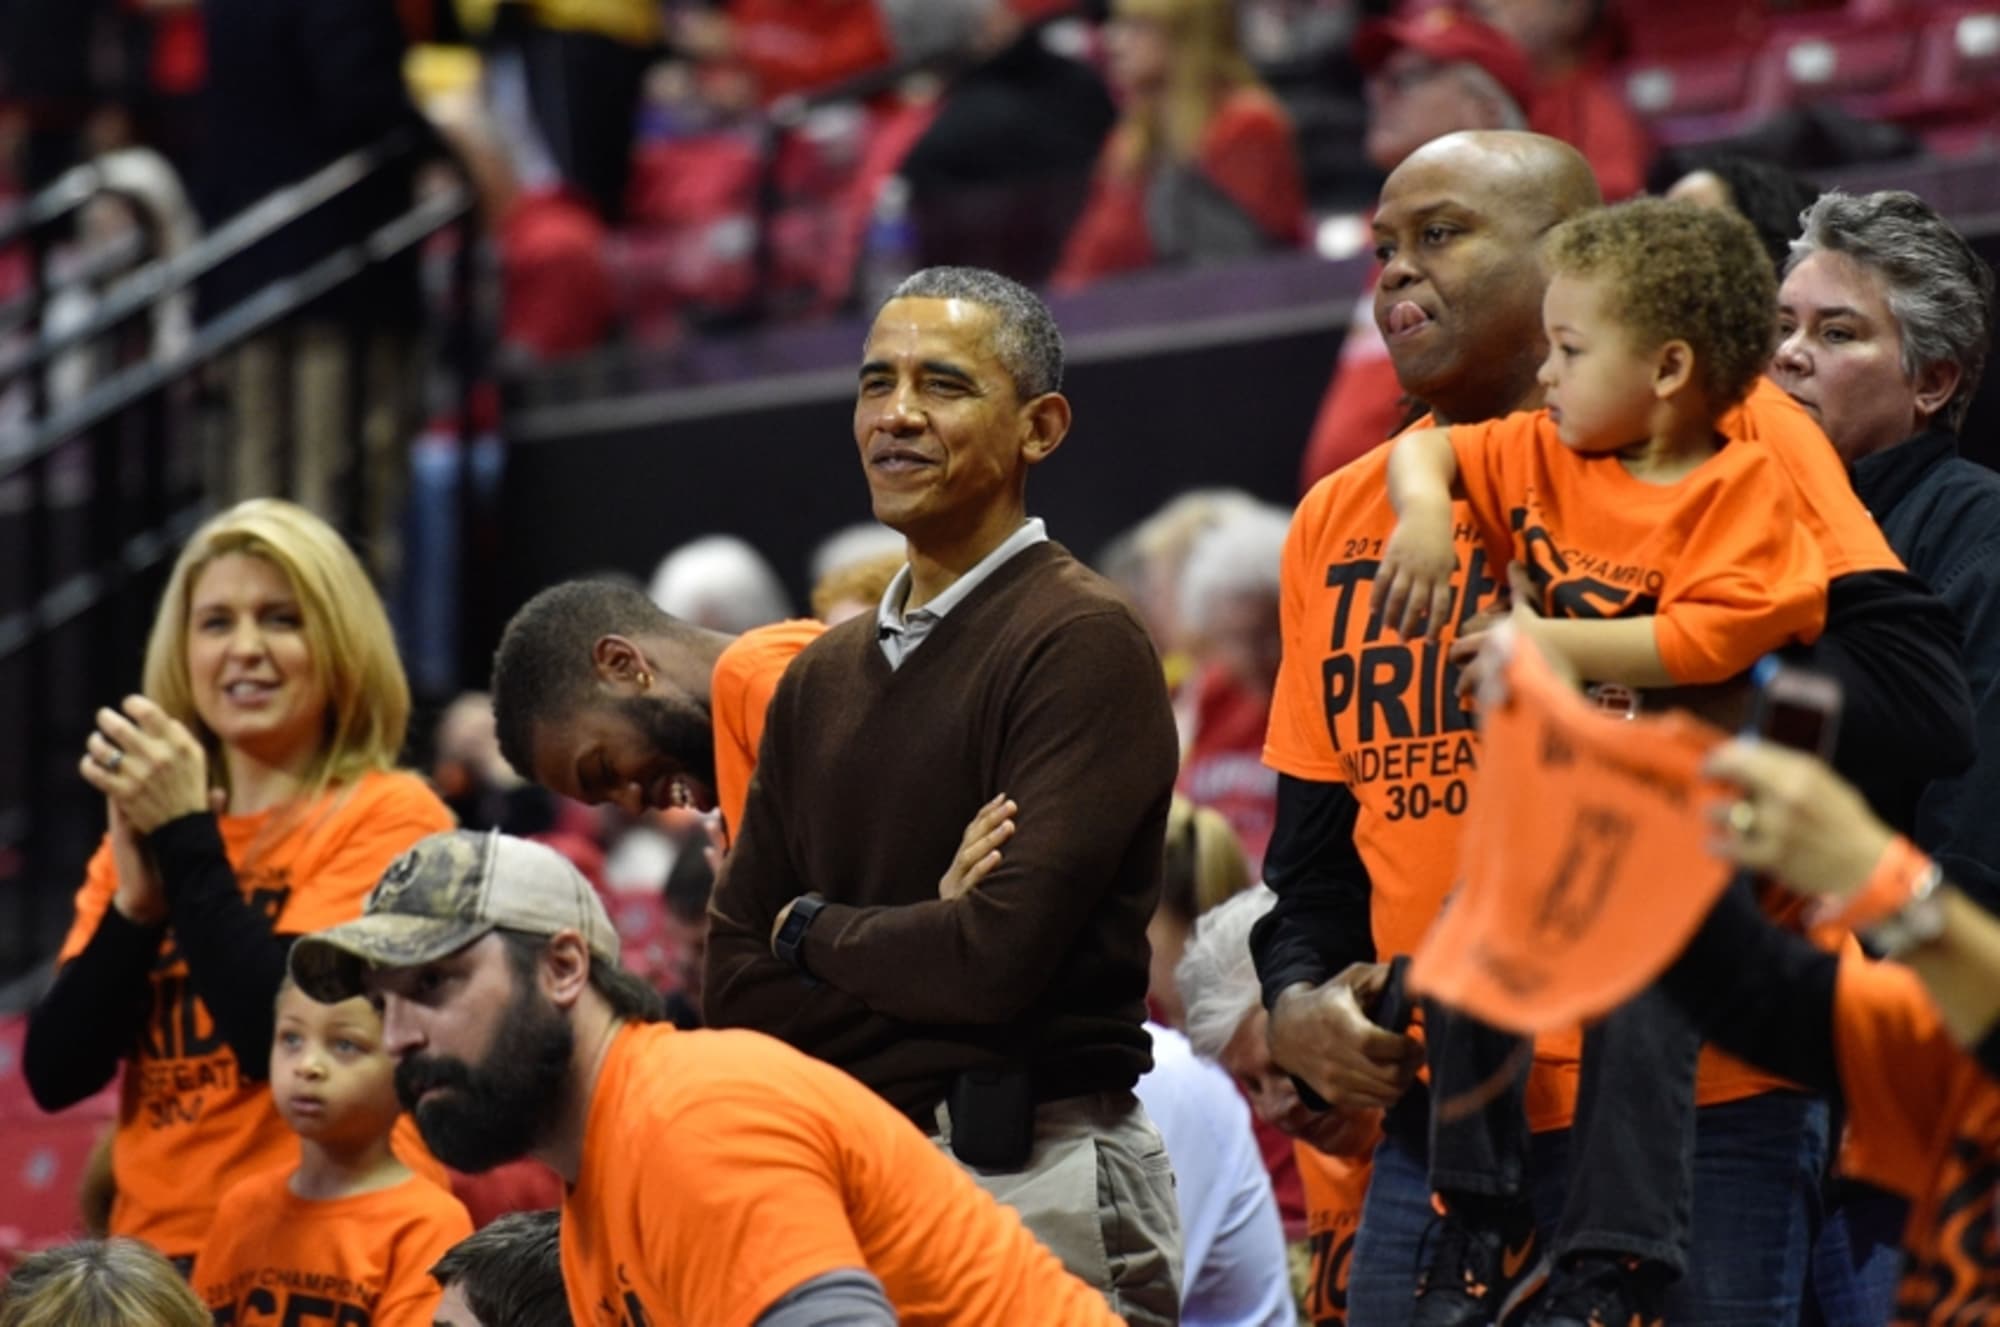 President Obama's niece threatened before PrincetonMaryland game